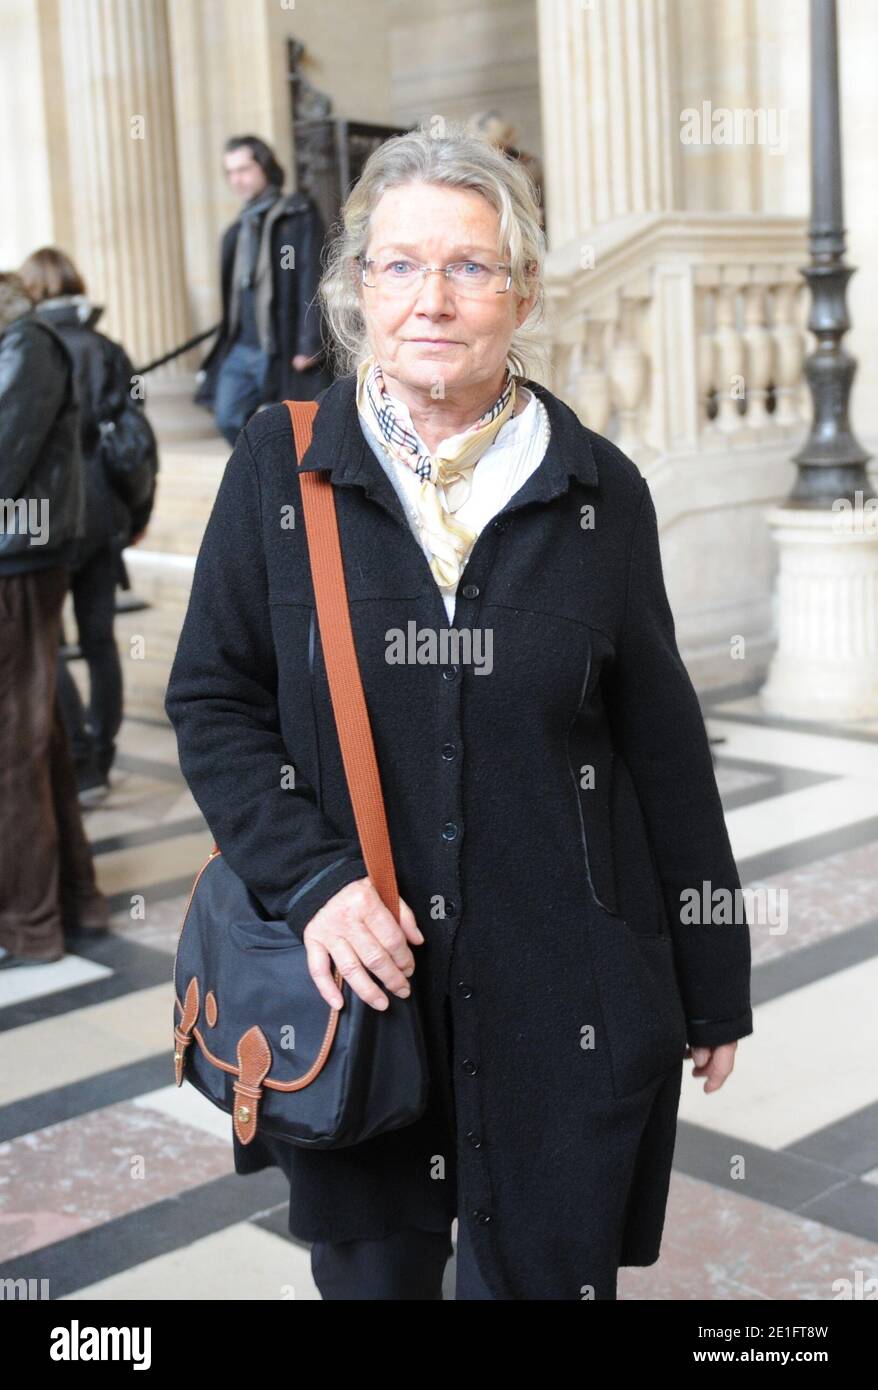 Danielle Gonnin, the mother of Kalinka Bamberski pictured at the Palais de Justice where she attended the second day of Krombach's trial for the murder of Kalinka Bamberski, in Paris, France on March 30, 2011. The French court today decided to continue the trial of the German doctor, who is accused of having raped and killed his then 14-year-old stepdaughter, Kalinka Bamberski, in the summer of 1982 while she was holidaying with her mother at Krombach's home at Lake Constance, southern Germany. A court in Germany ruled that Krombach could not be held responsible for the death, but in 1995 a co Stock Photo